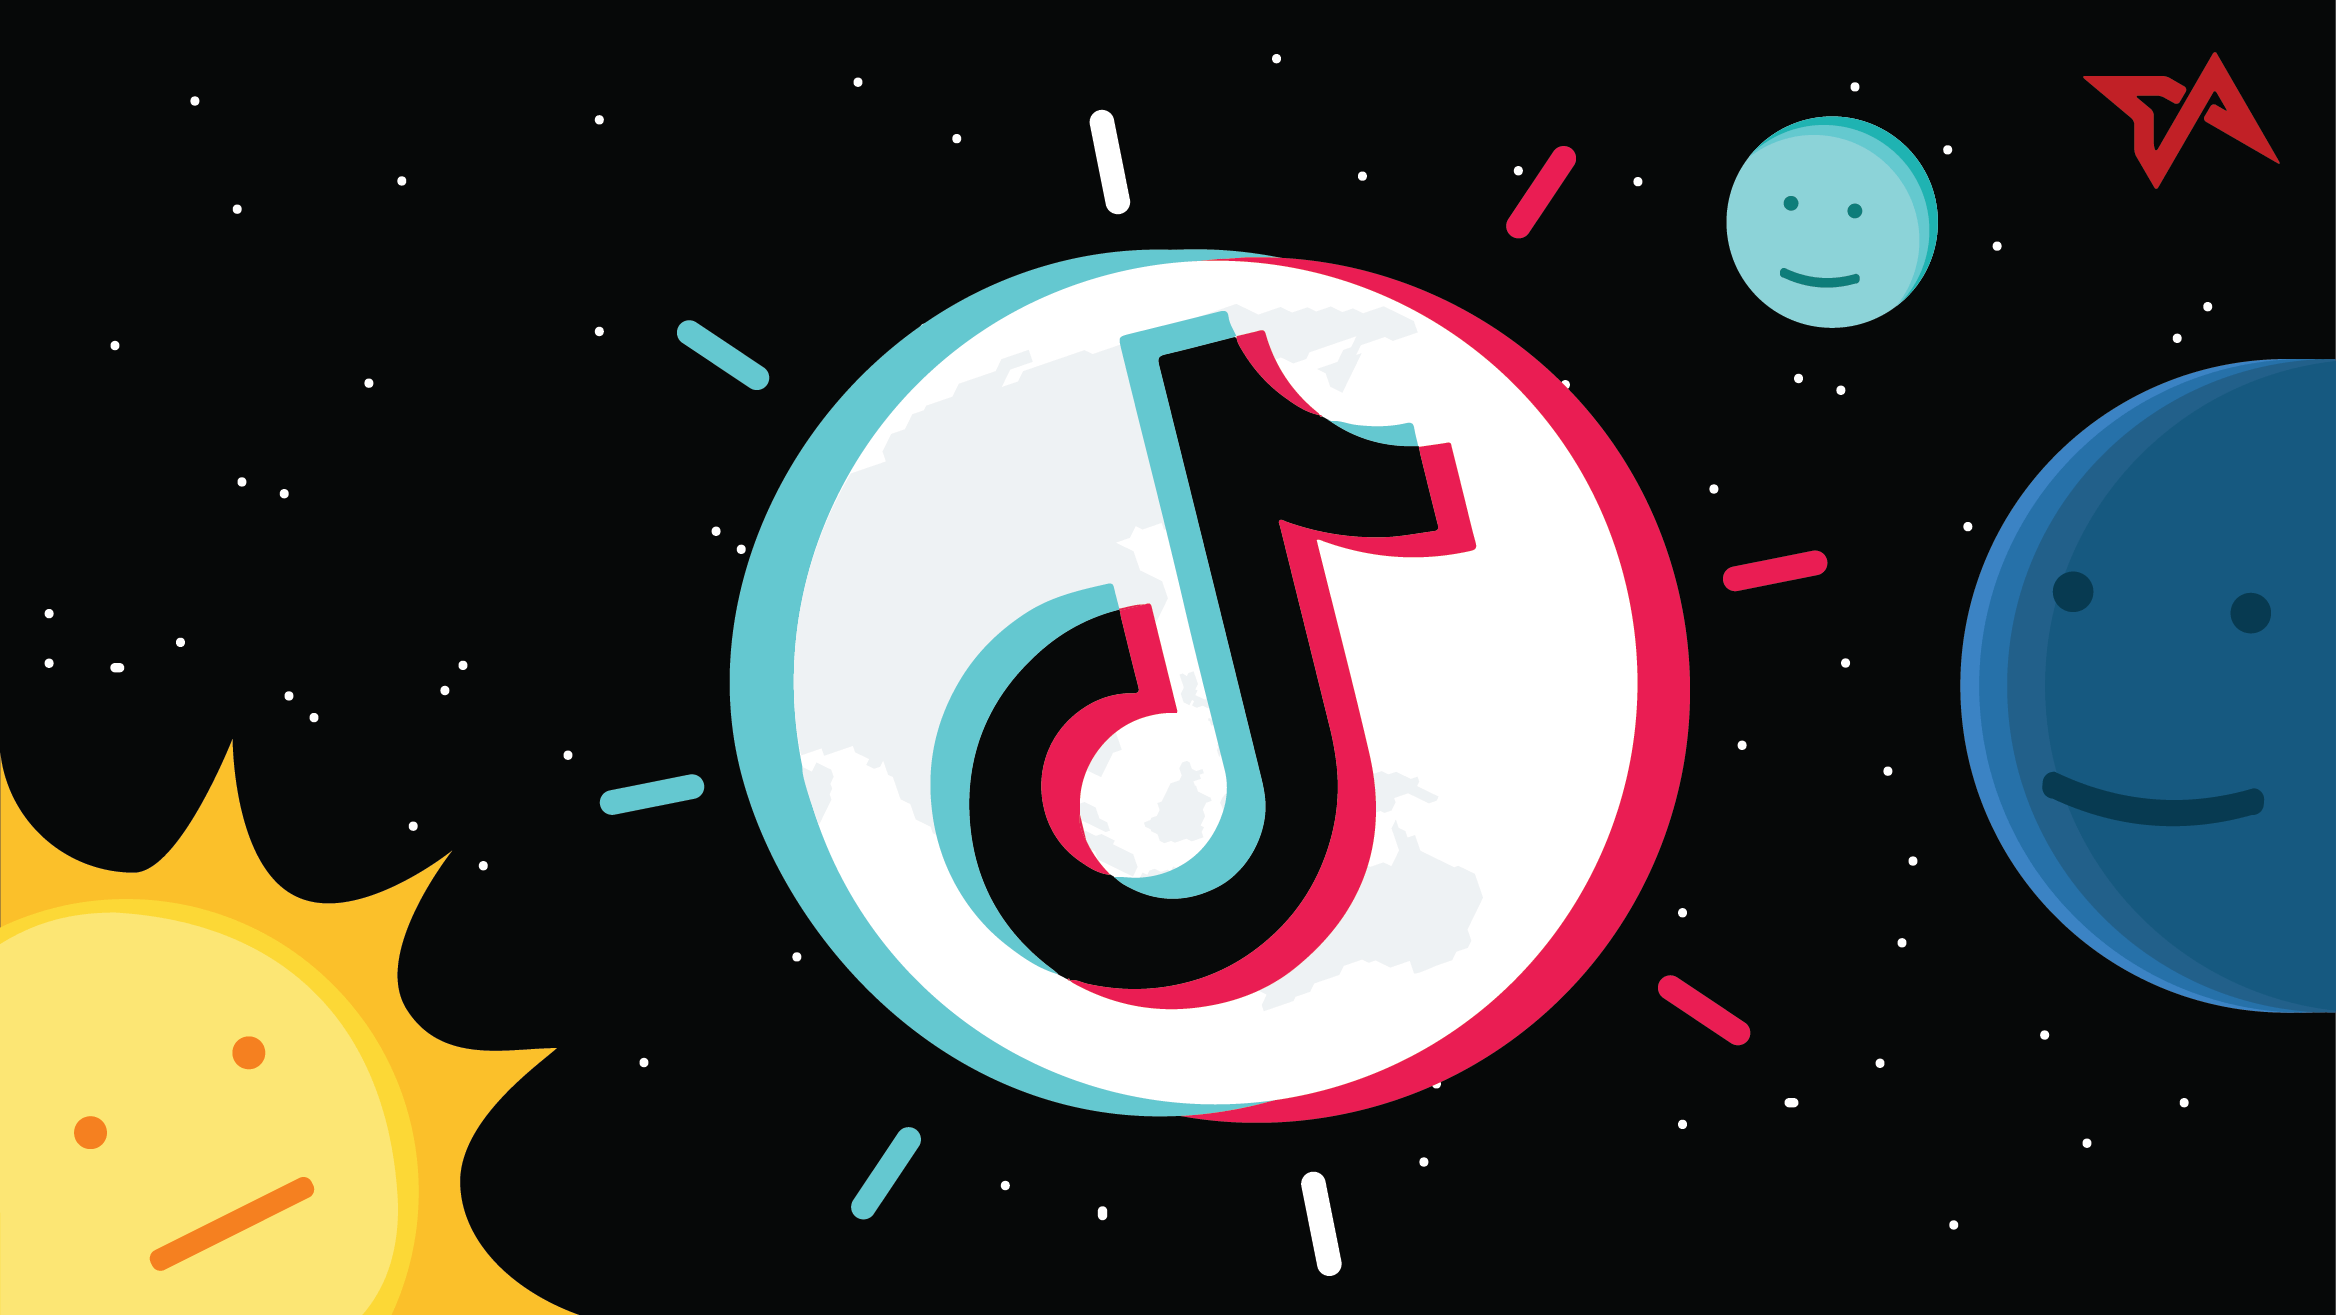 An Easy Guide To Getting More TikTok Views